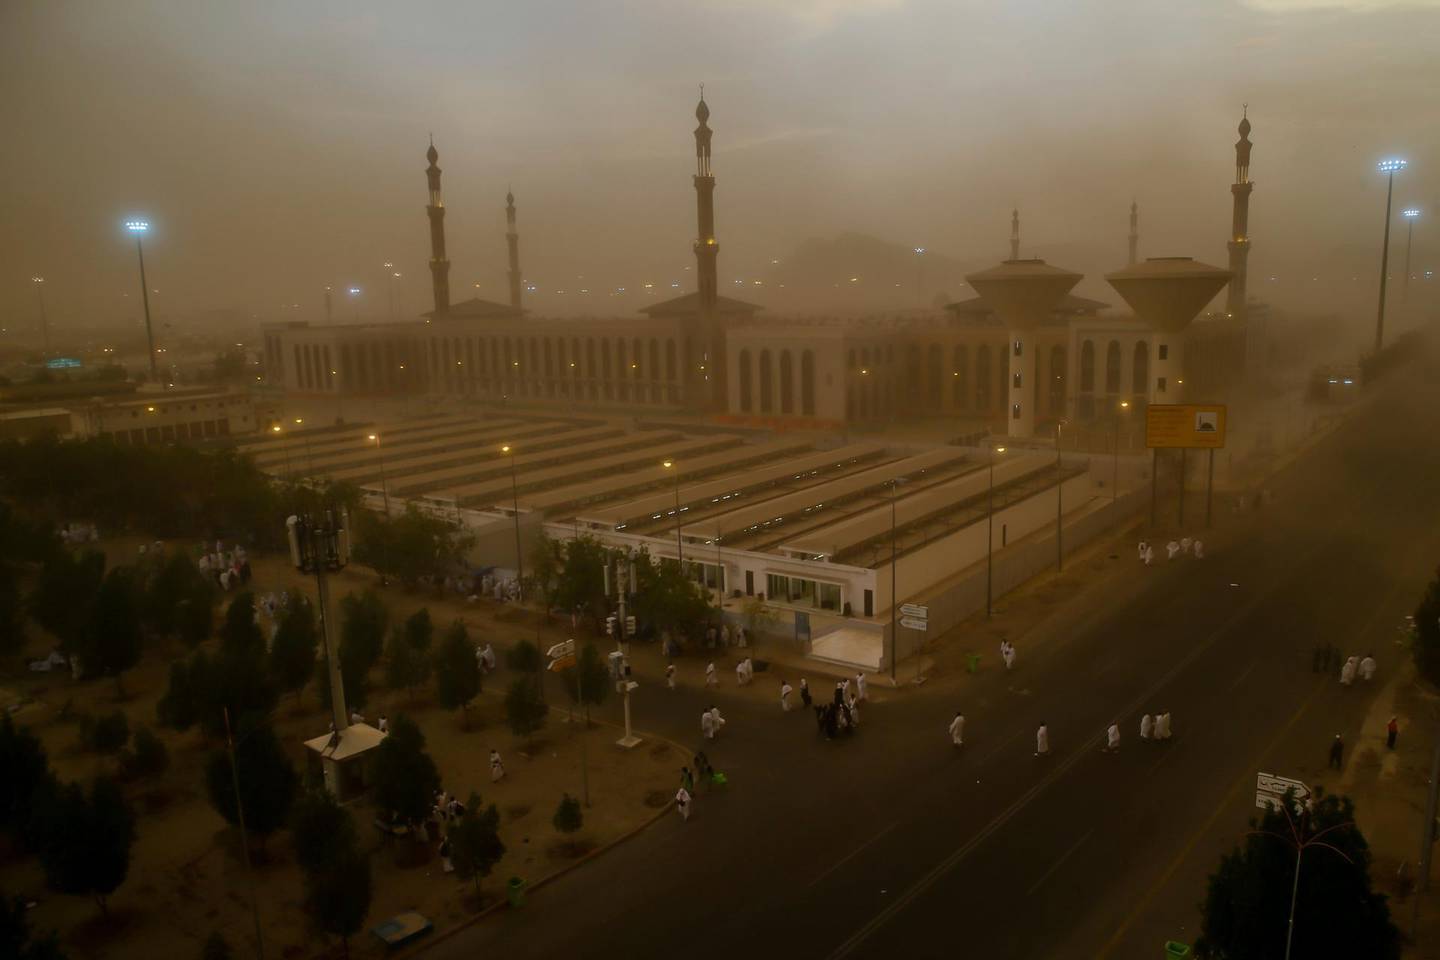 A sand storm engulfs Muslim pilgrims as they arrive at Namirah Mosque on Arafat Mountain, during the annual hajj pilgrimage, outside the holy city of Mecca, Saudi Arabia, Sunday, Aug. 19, 2018. More than 2 million Muslims have begun the annual hajj pilgrimage, representing one of the five pillars of Islam and is required of all able-bodied Muslims once in their life. (AP Photo/Dar Yasin)